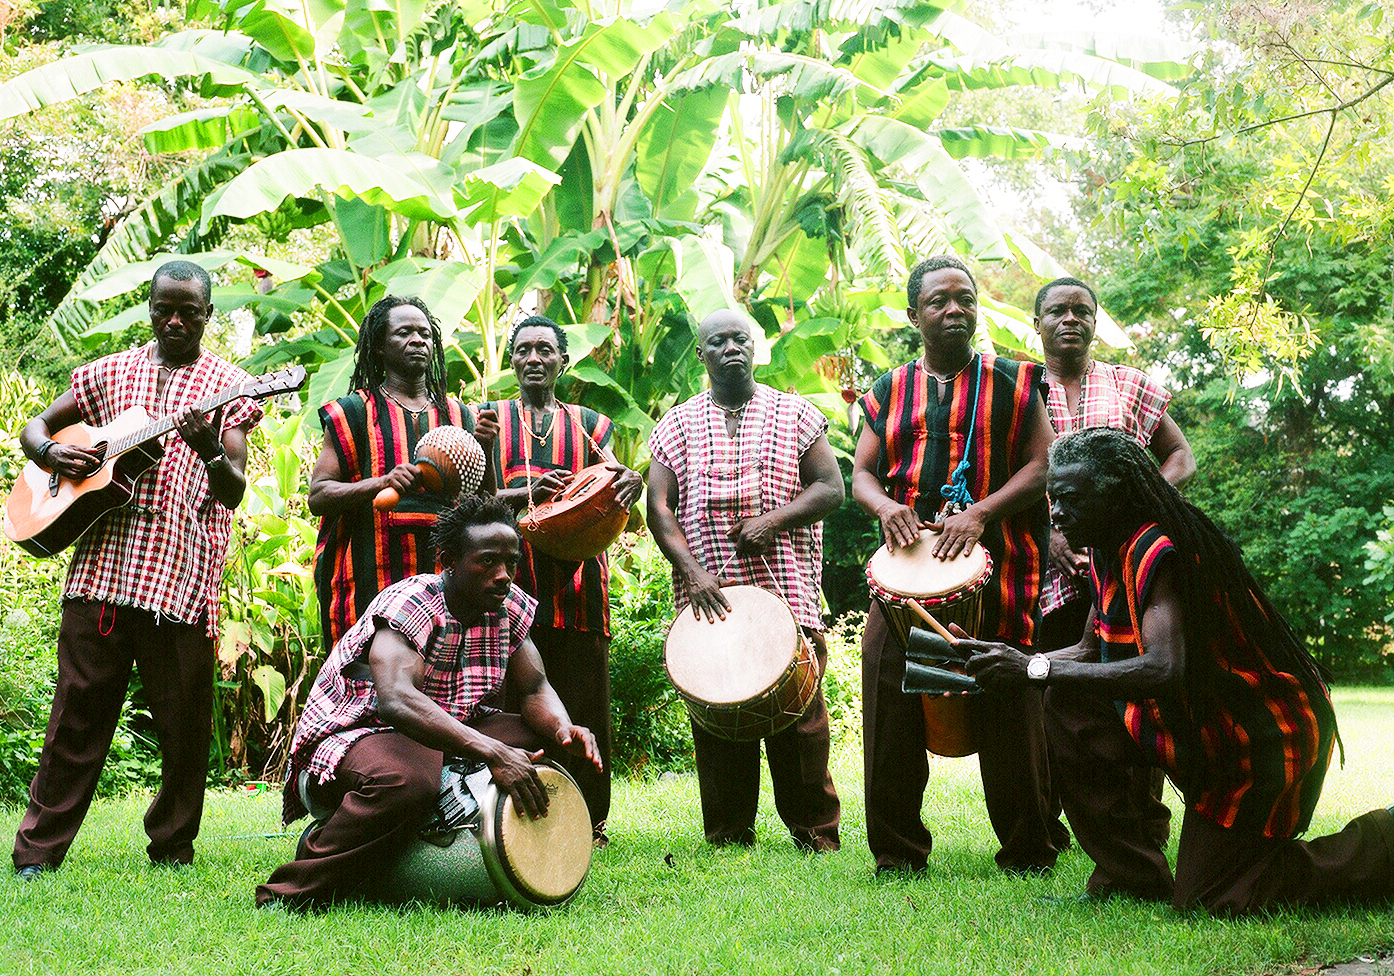 Sierra Leone's African All Stars offers African music that lifts the soul and puts a smile on your face.